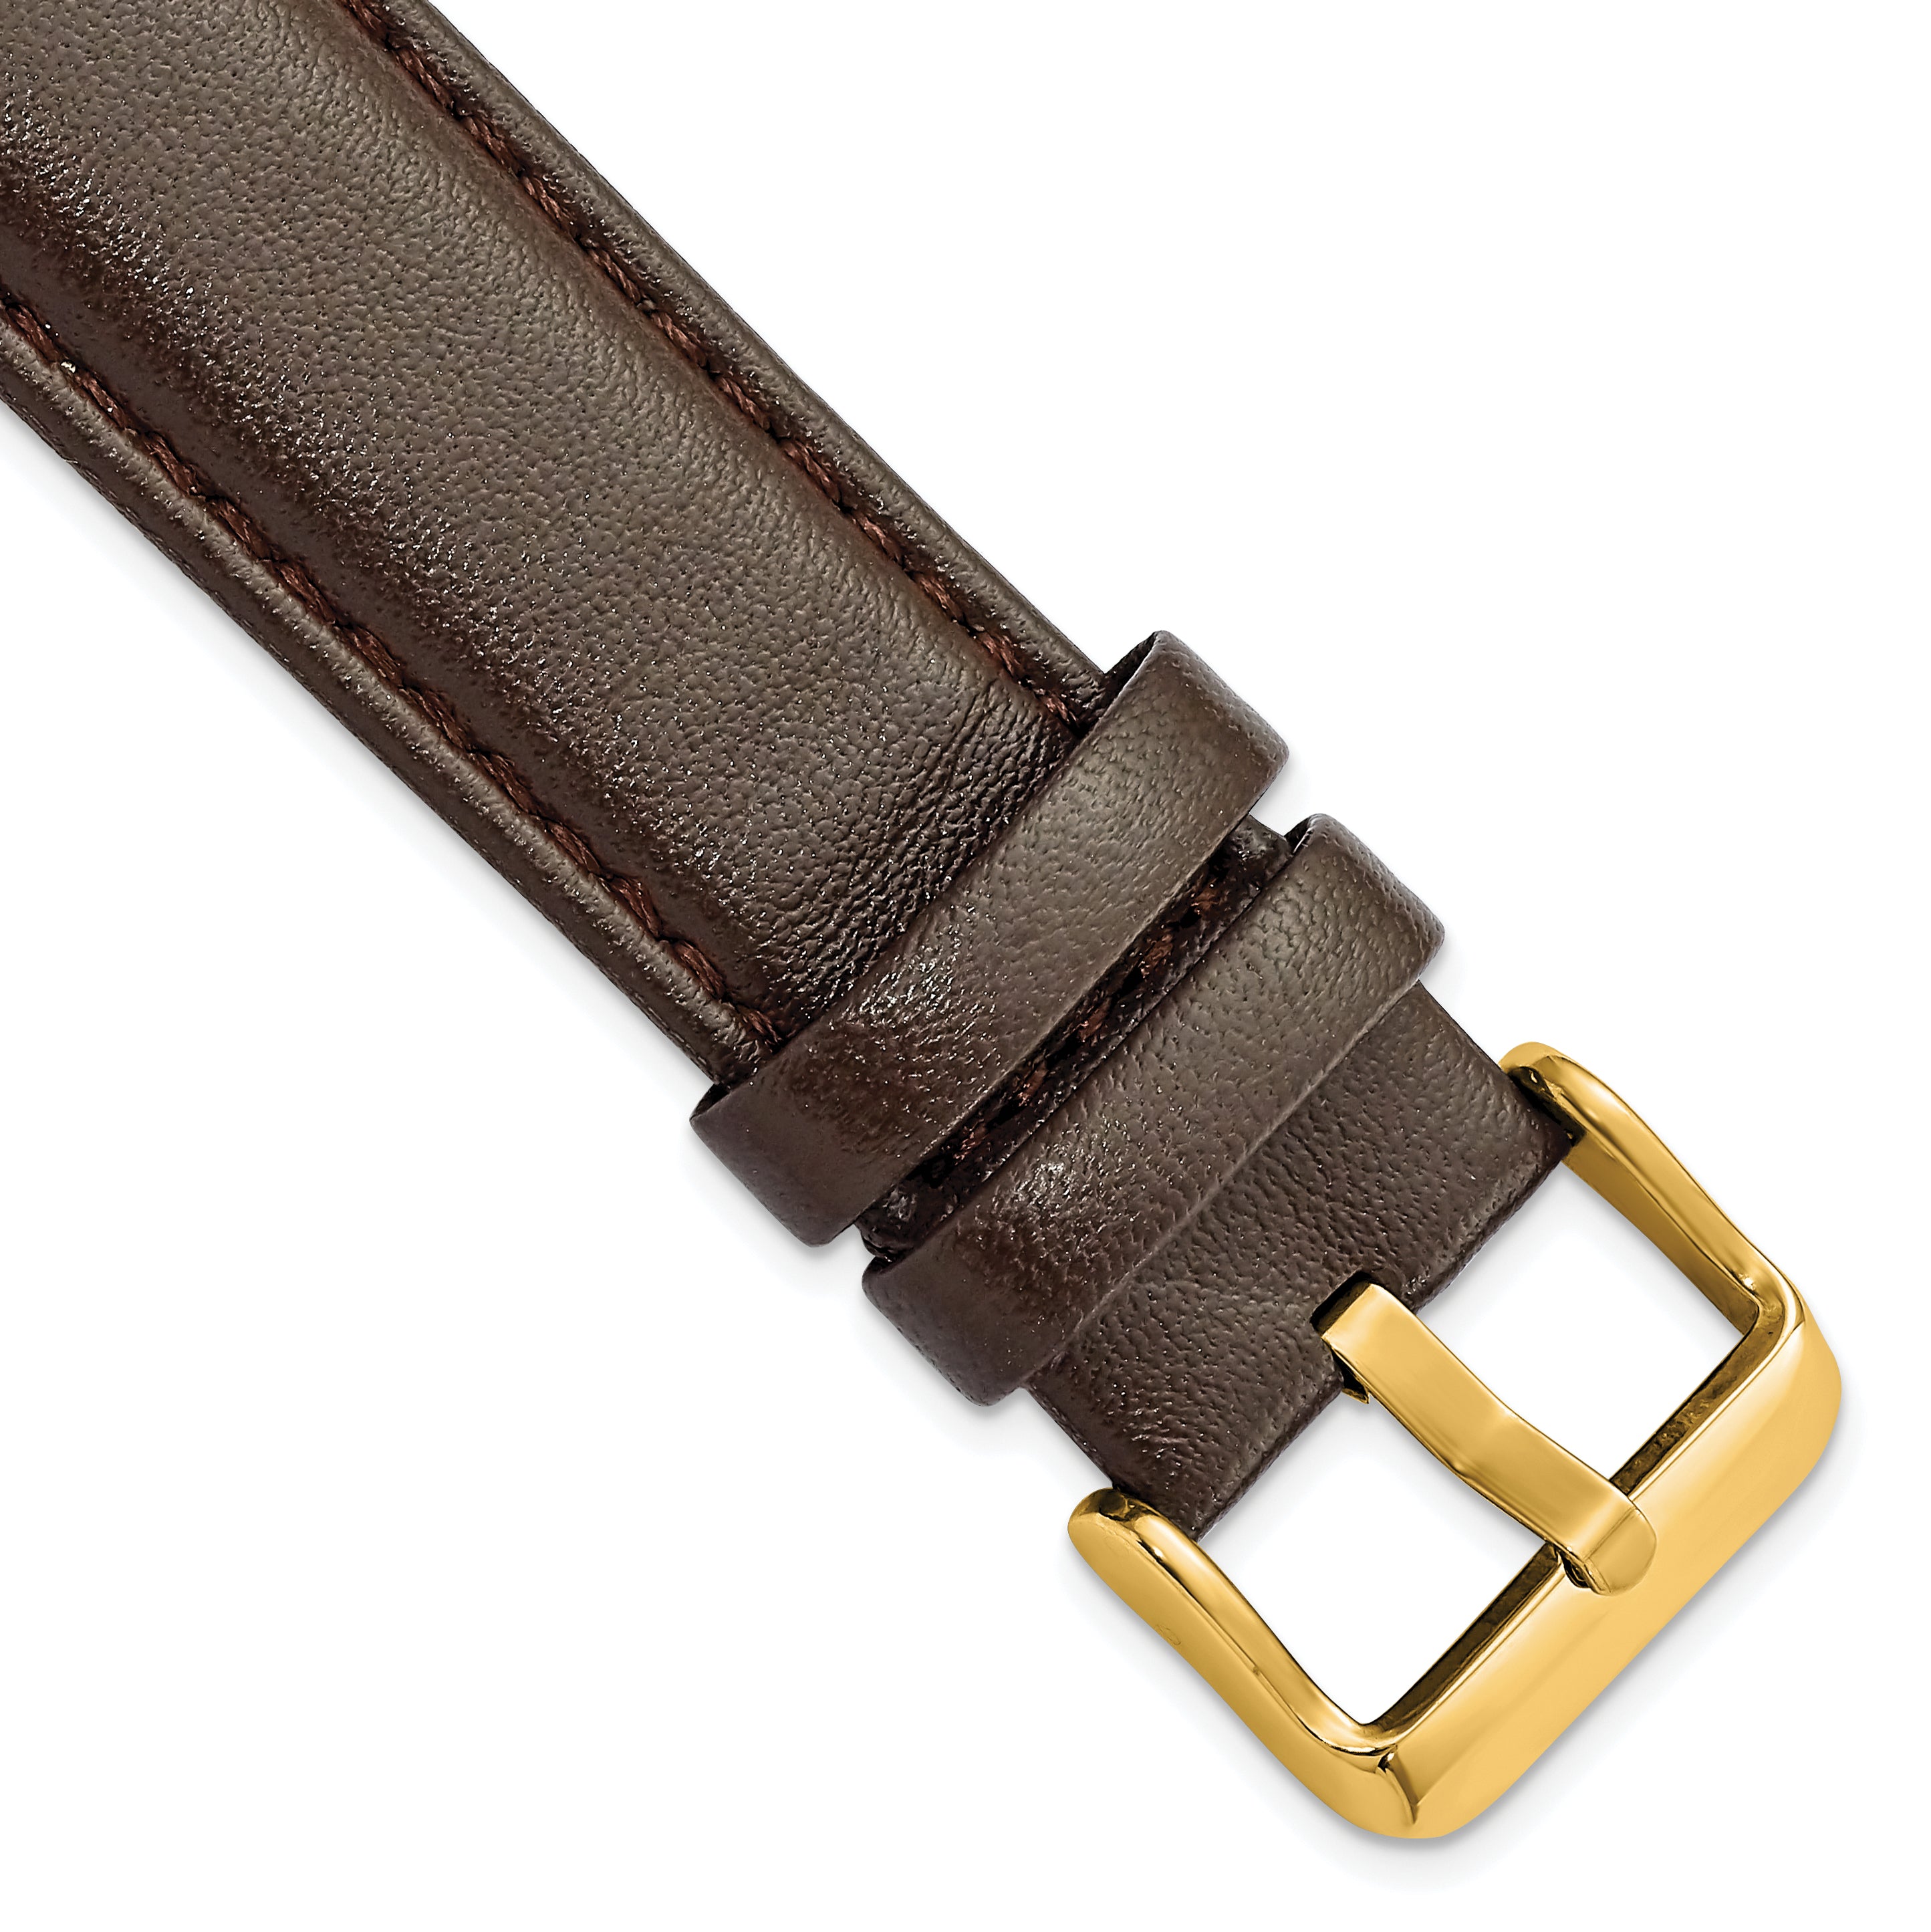 DeBeer 22mm Dark Brown Glove Leather with Gold-tone Panerai Style Buckle 7.75 inch Watch Band